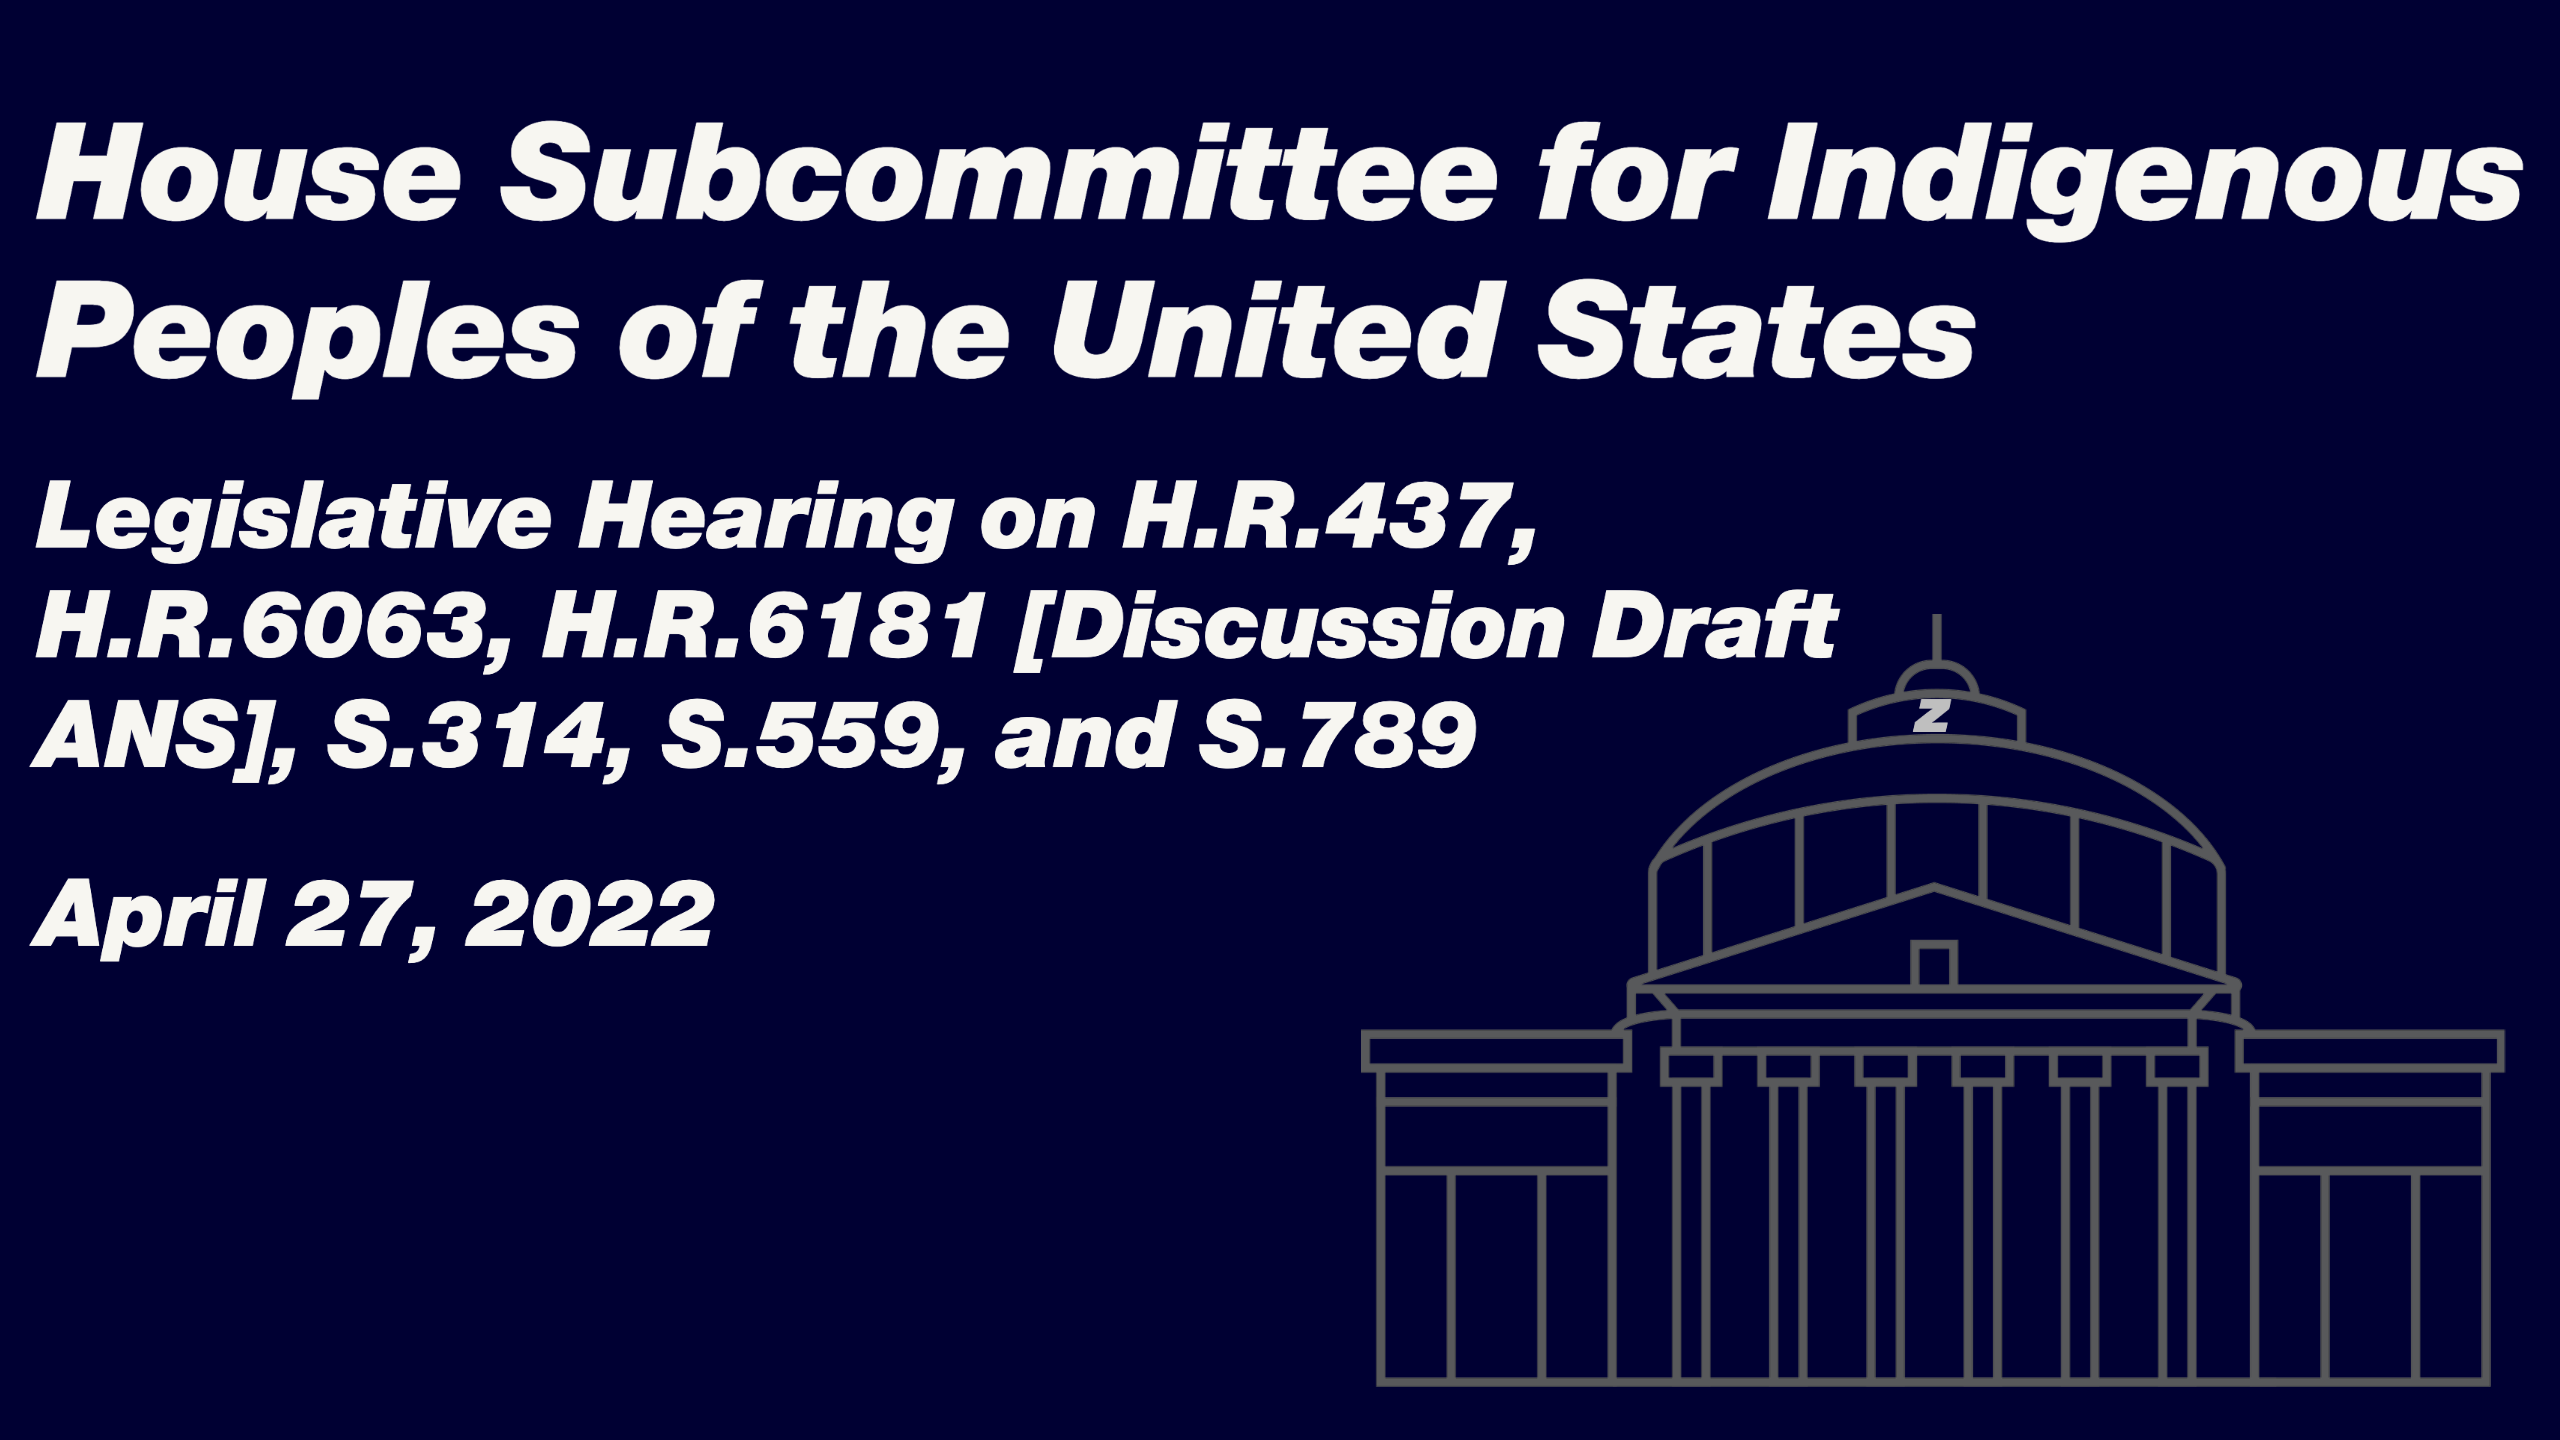 Legislative Hearing on H.R. 437, H.R. 6063, H.R. 6181 [Discussion Draft ANS], S. 314, S. 559, and S. 789